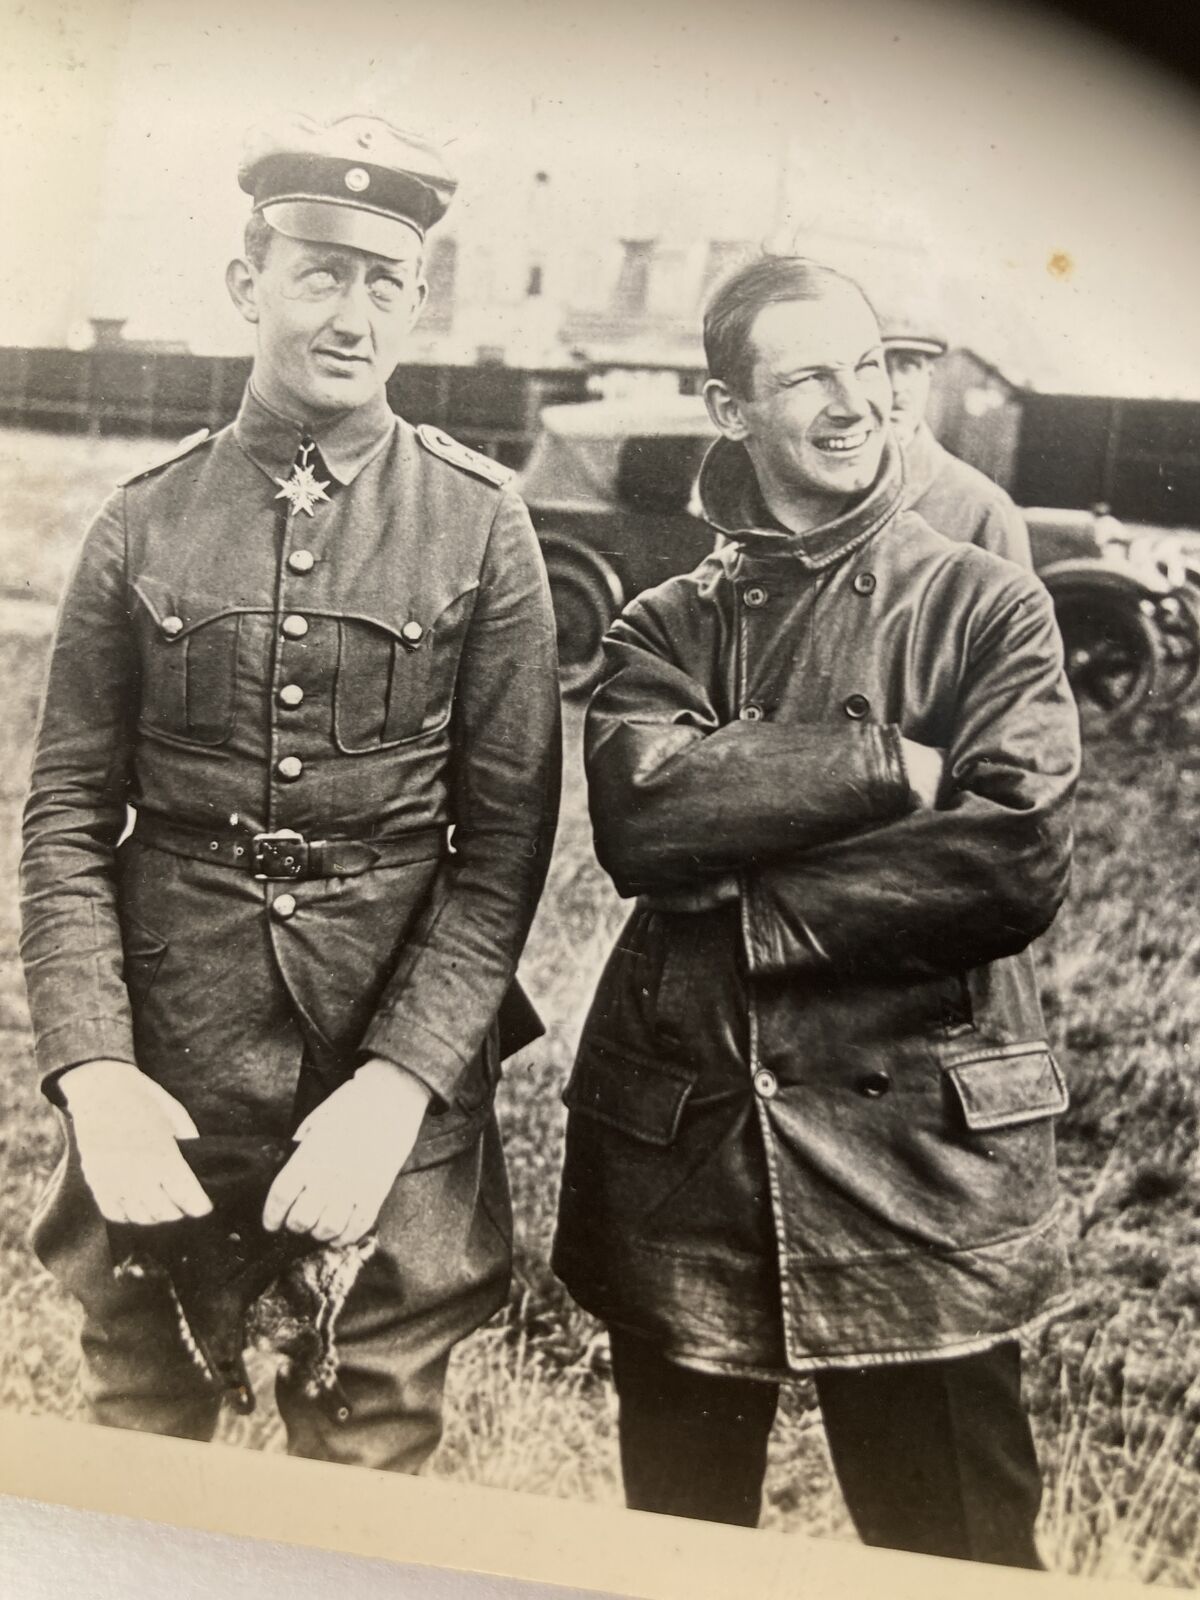 WW1 Original Photo of Aviation Pioneer Tony Fokker and Werner Voss German Ace